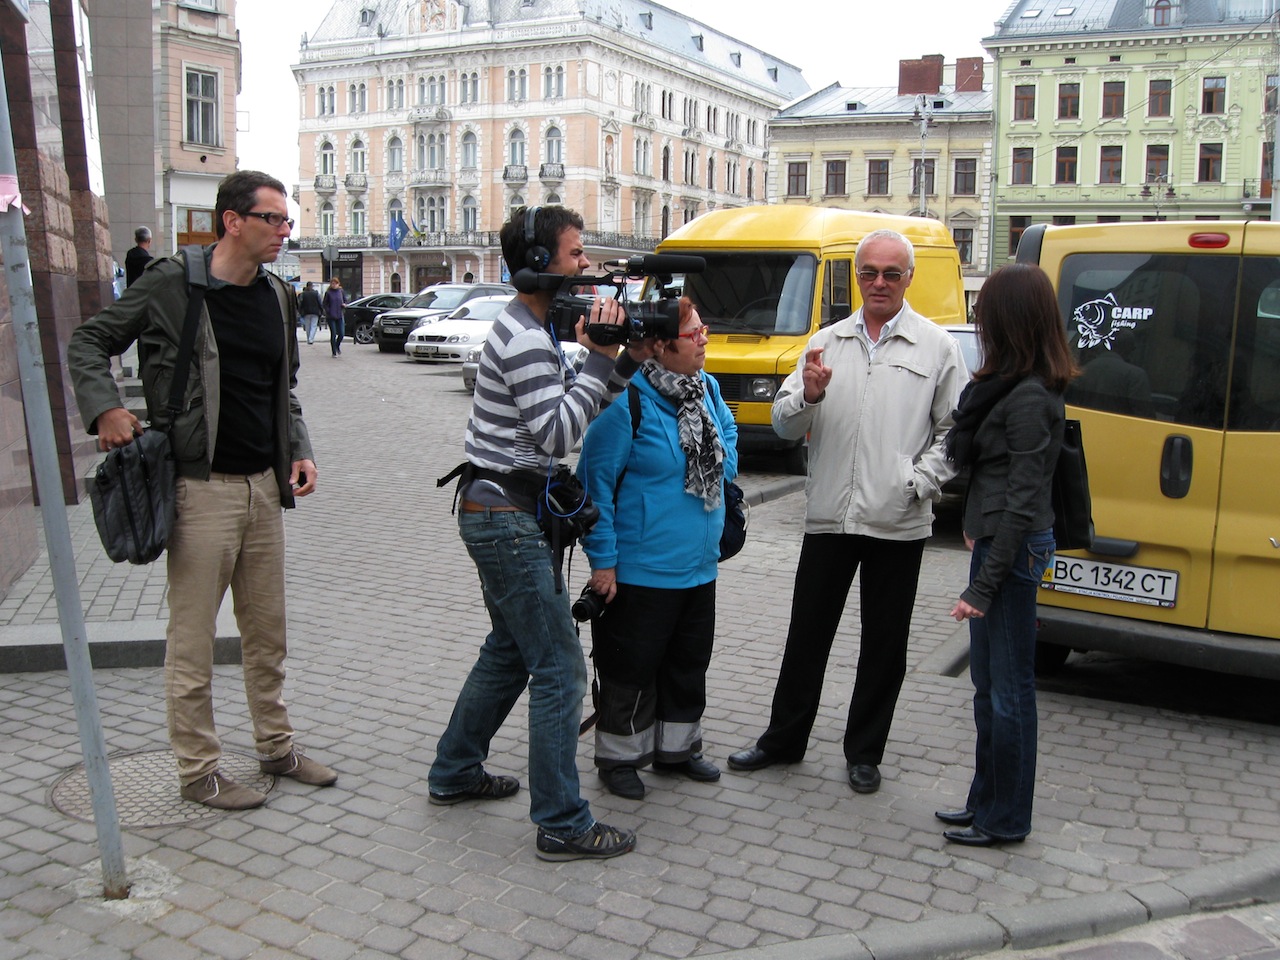 filming begins with Sylvie and Alex in the old town of Lviv, on a tour of Jewish sites